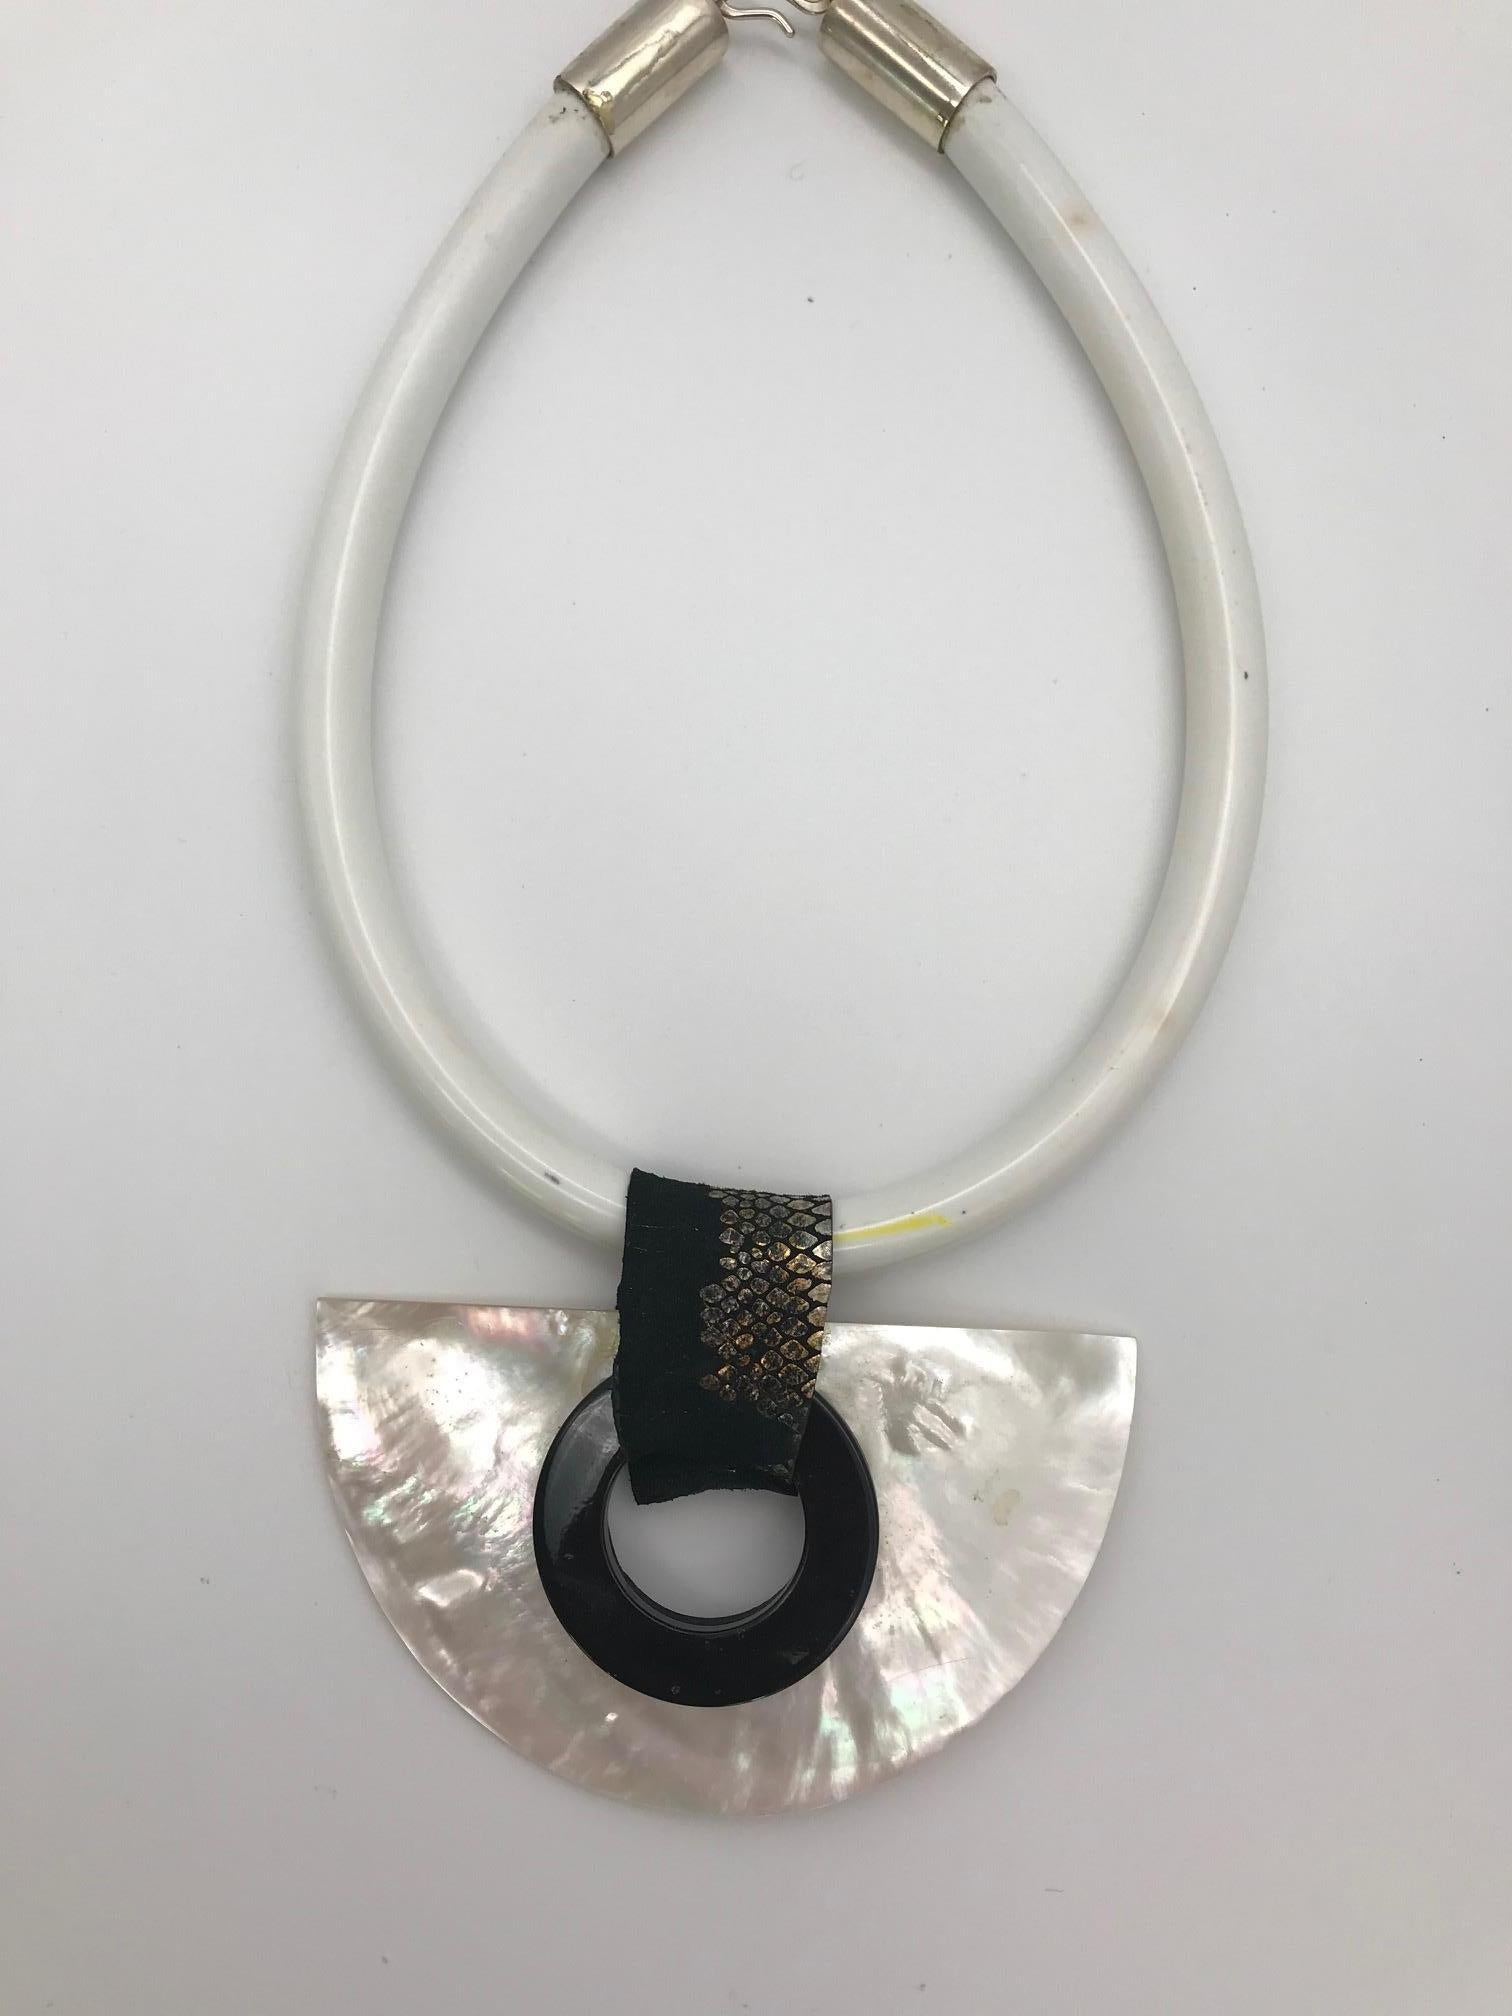 
Mother of Pearl Pendant , white  is eco-luxe and sustainable The materials used are iridescent mother of pearl/nacre, called Pinctada Maxima, which is shown in the last image. The White Moon pendant has a black resin circle on one side and a rubber